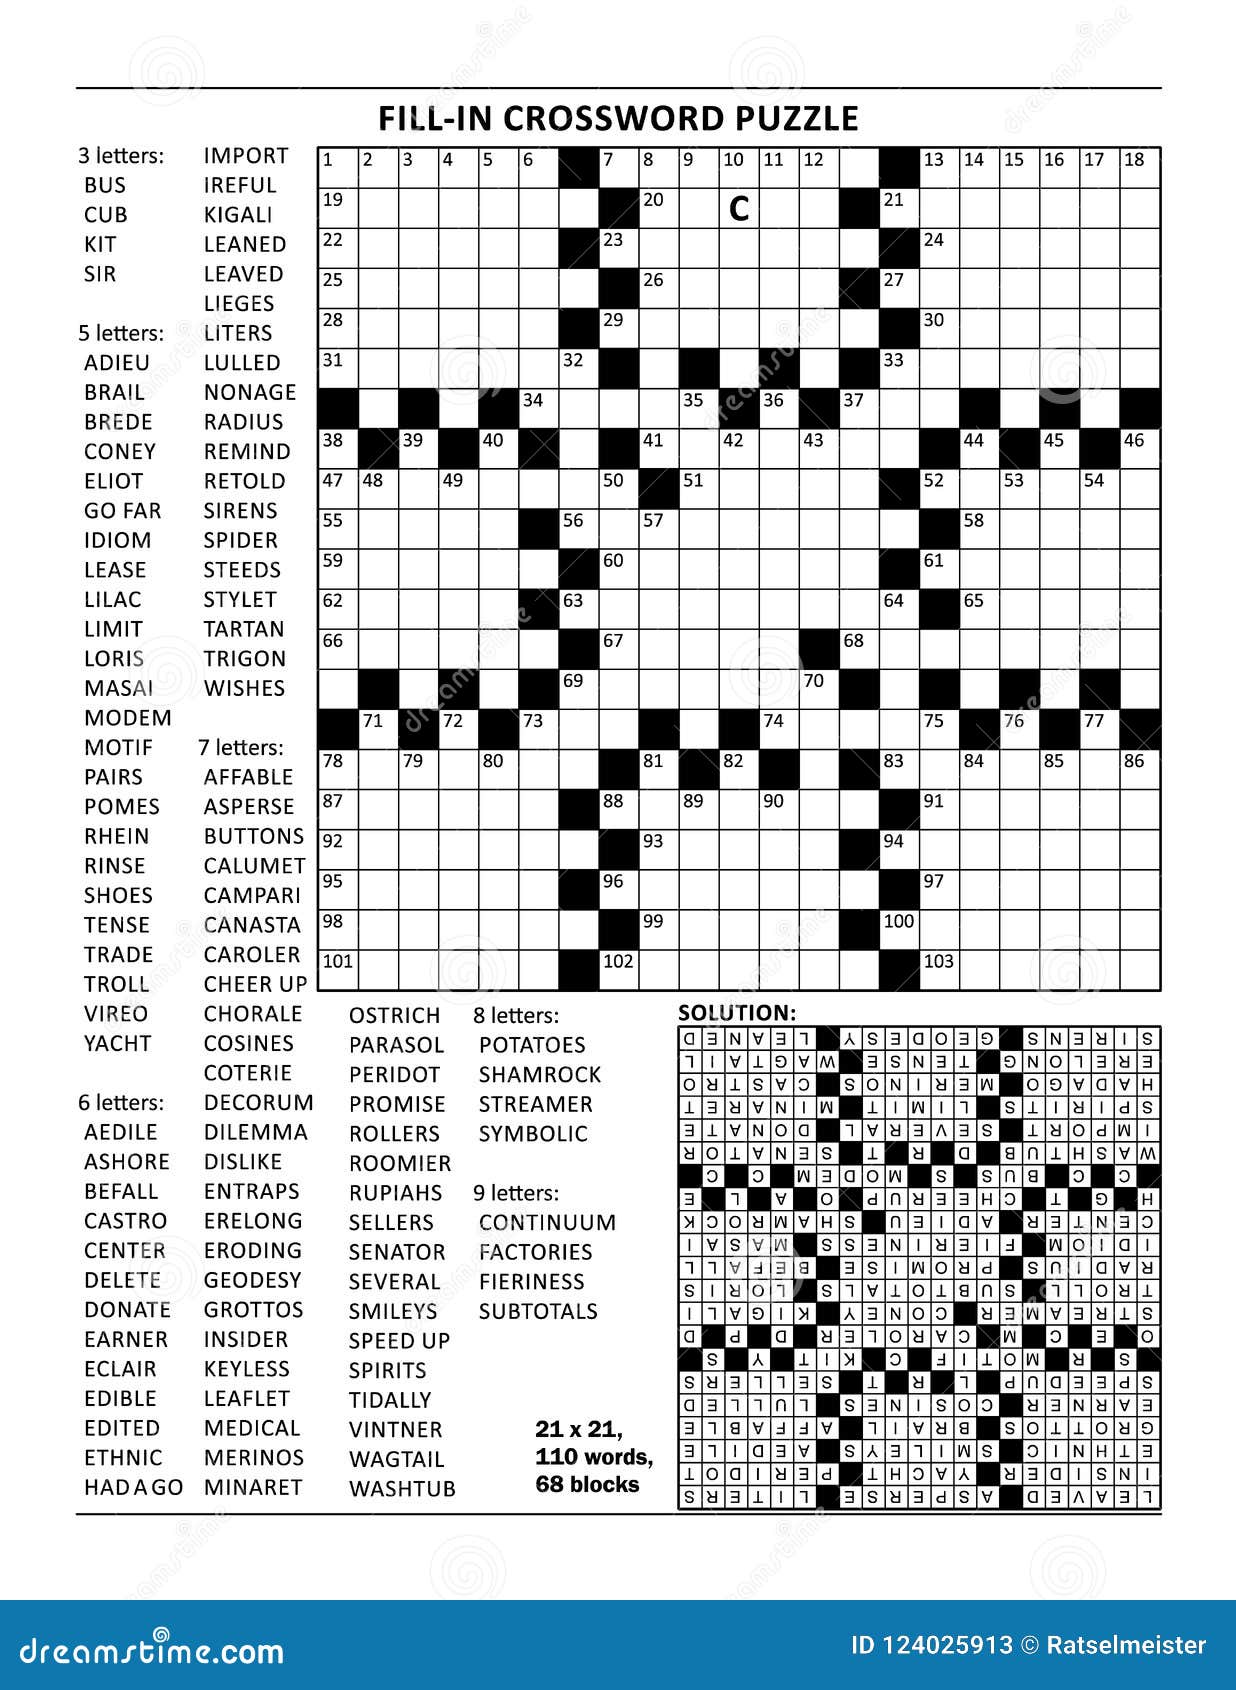 crossword-puzzle-of-21x21-size-and-fill-in-criss-cross-or-kriss-kross